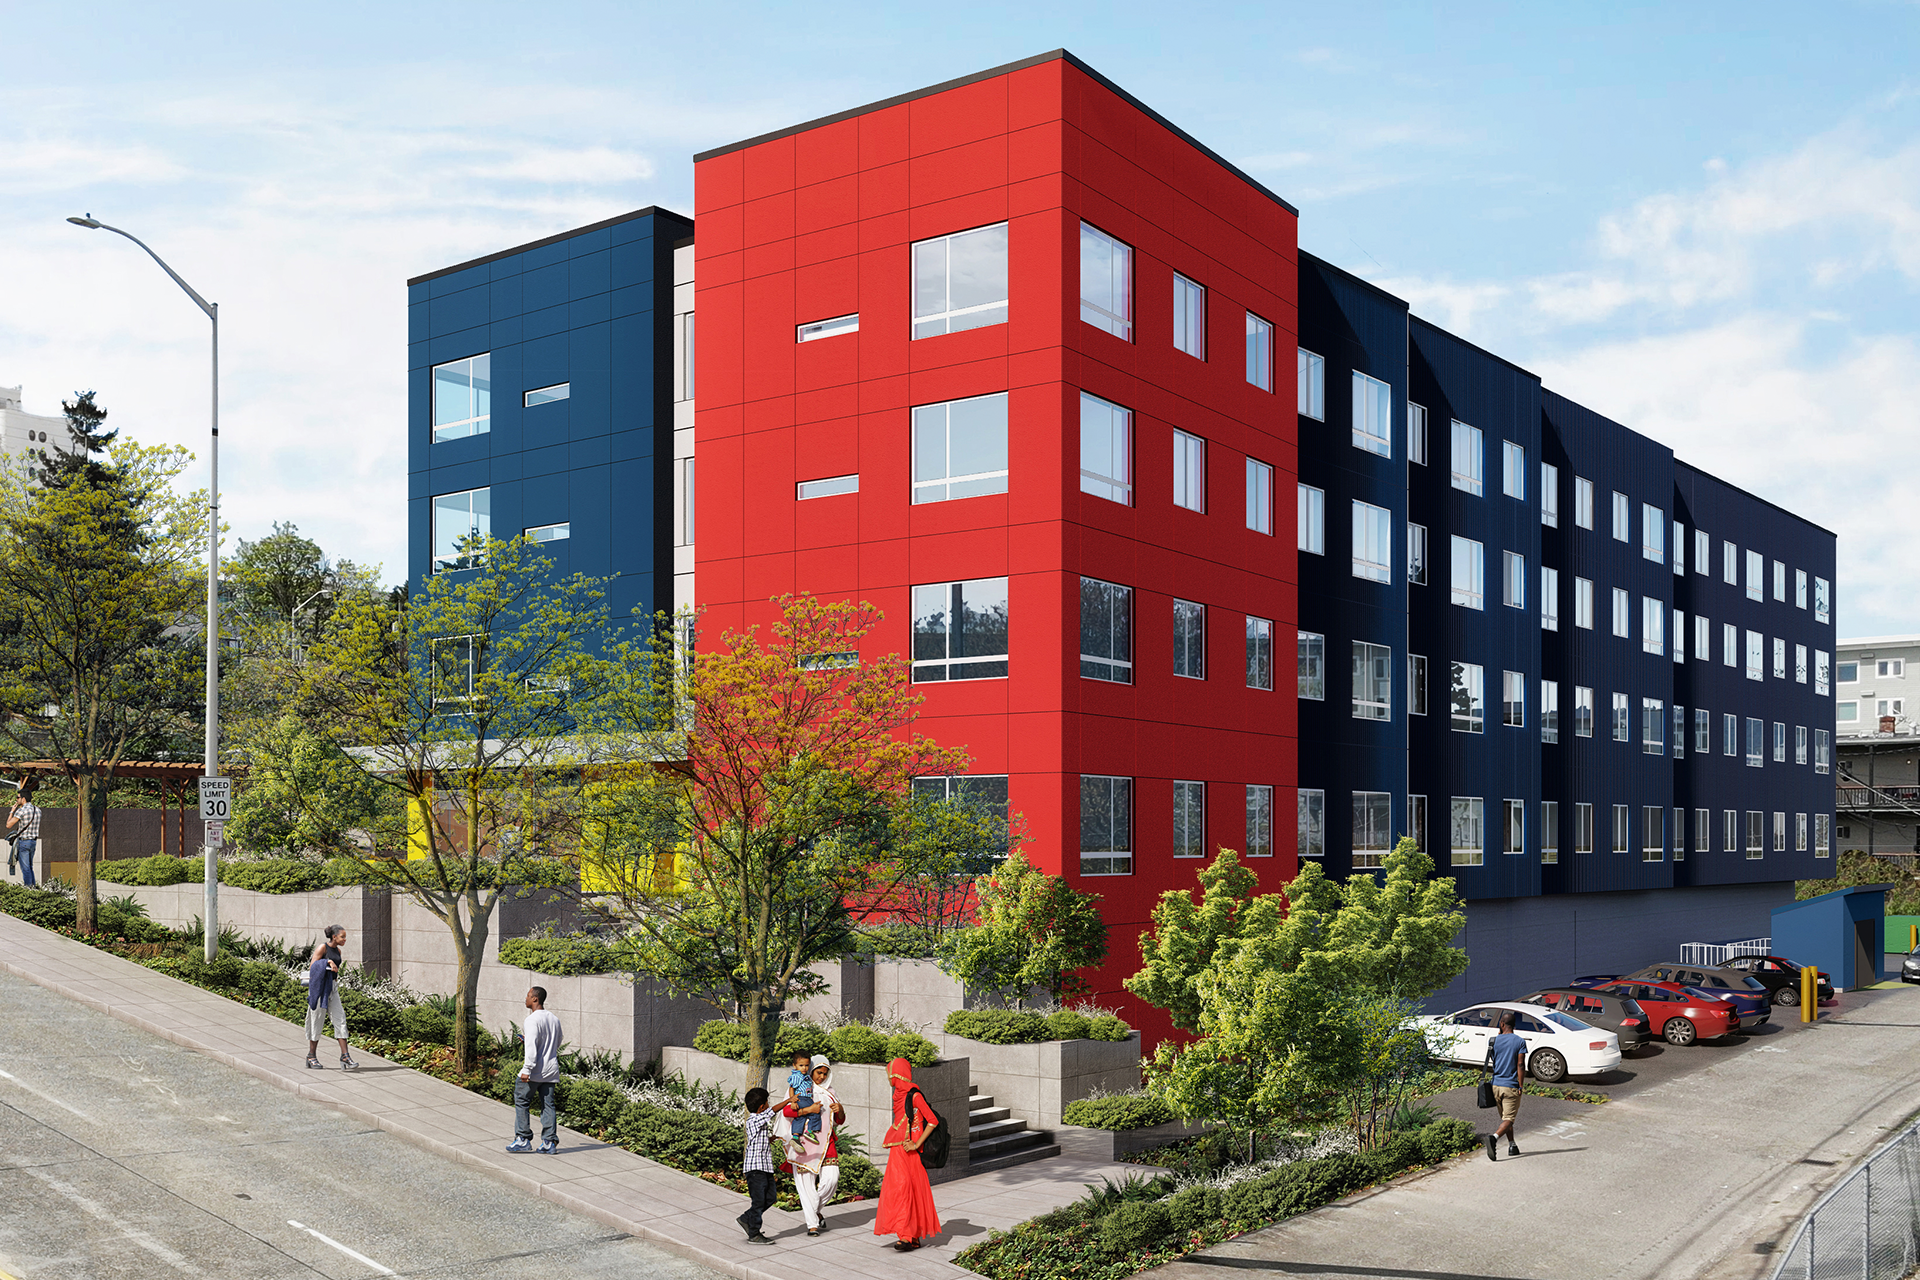 An artistic rendering of the Hillside Terrace building shows a red and blue exterior with parking at the ground floor.